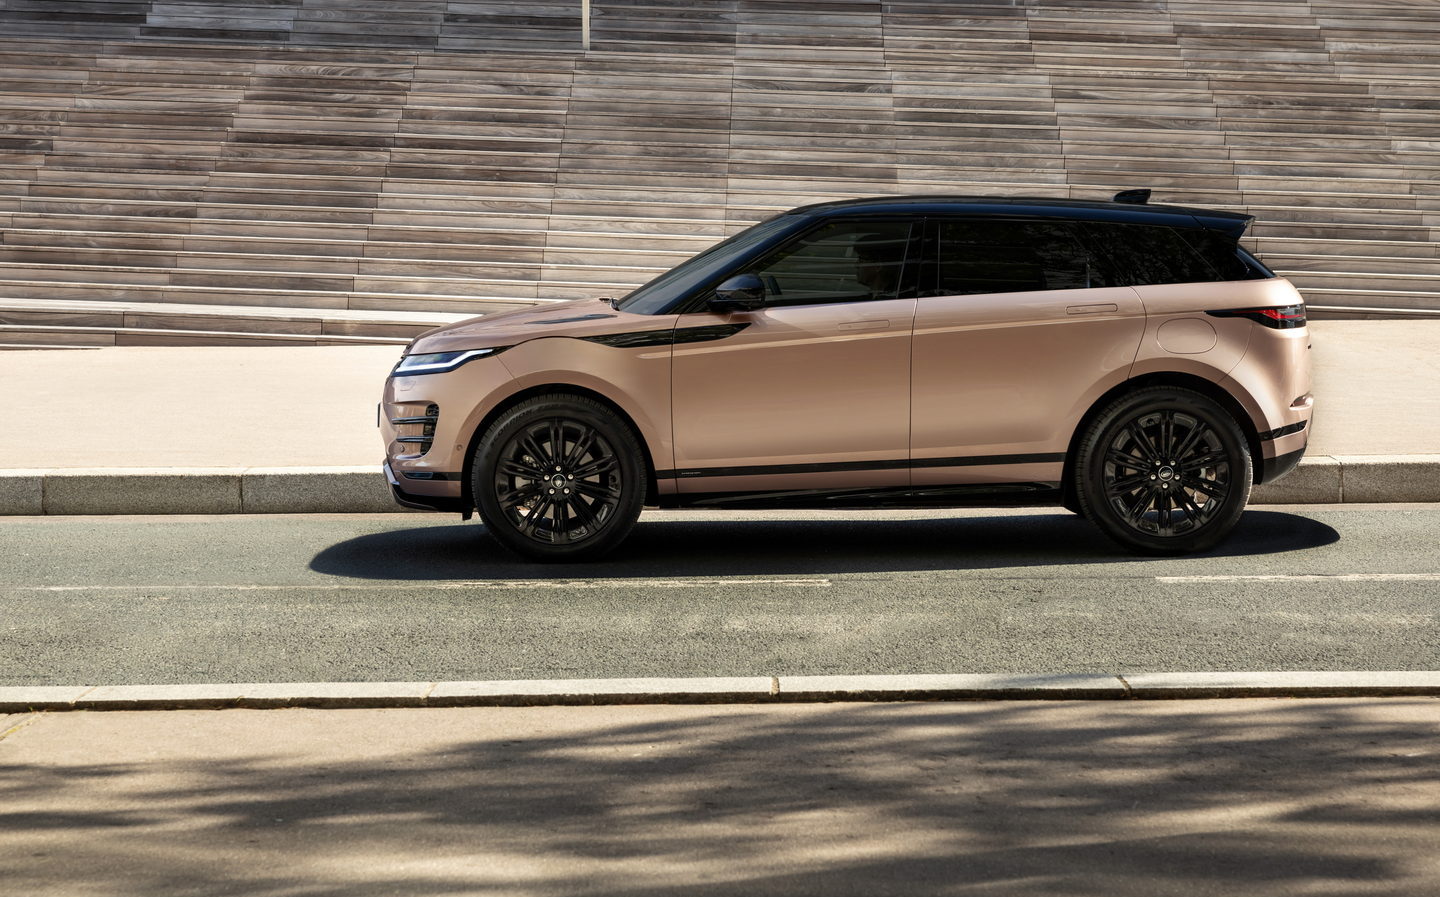 New products for Range Rover Evoque - H & R